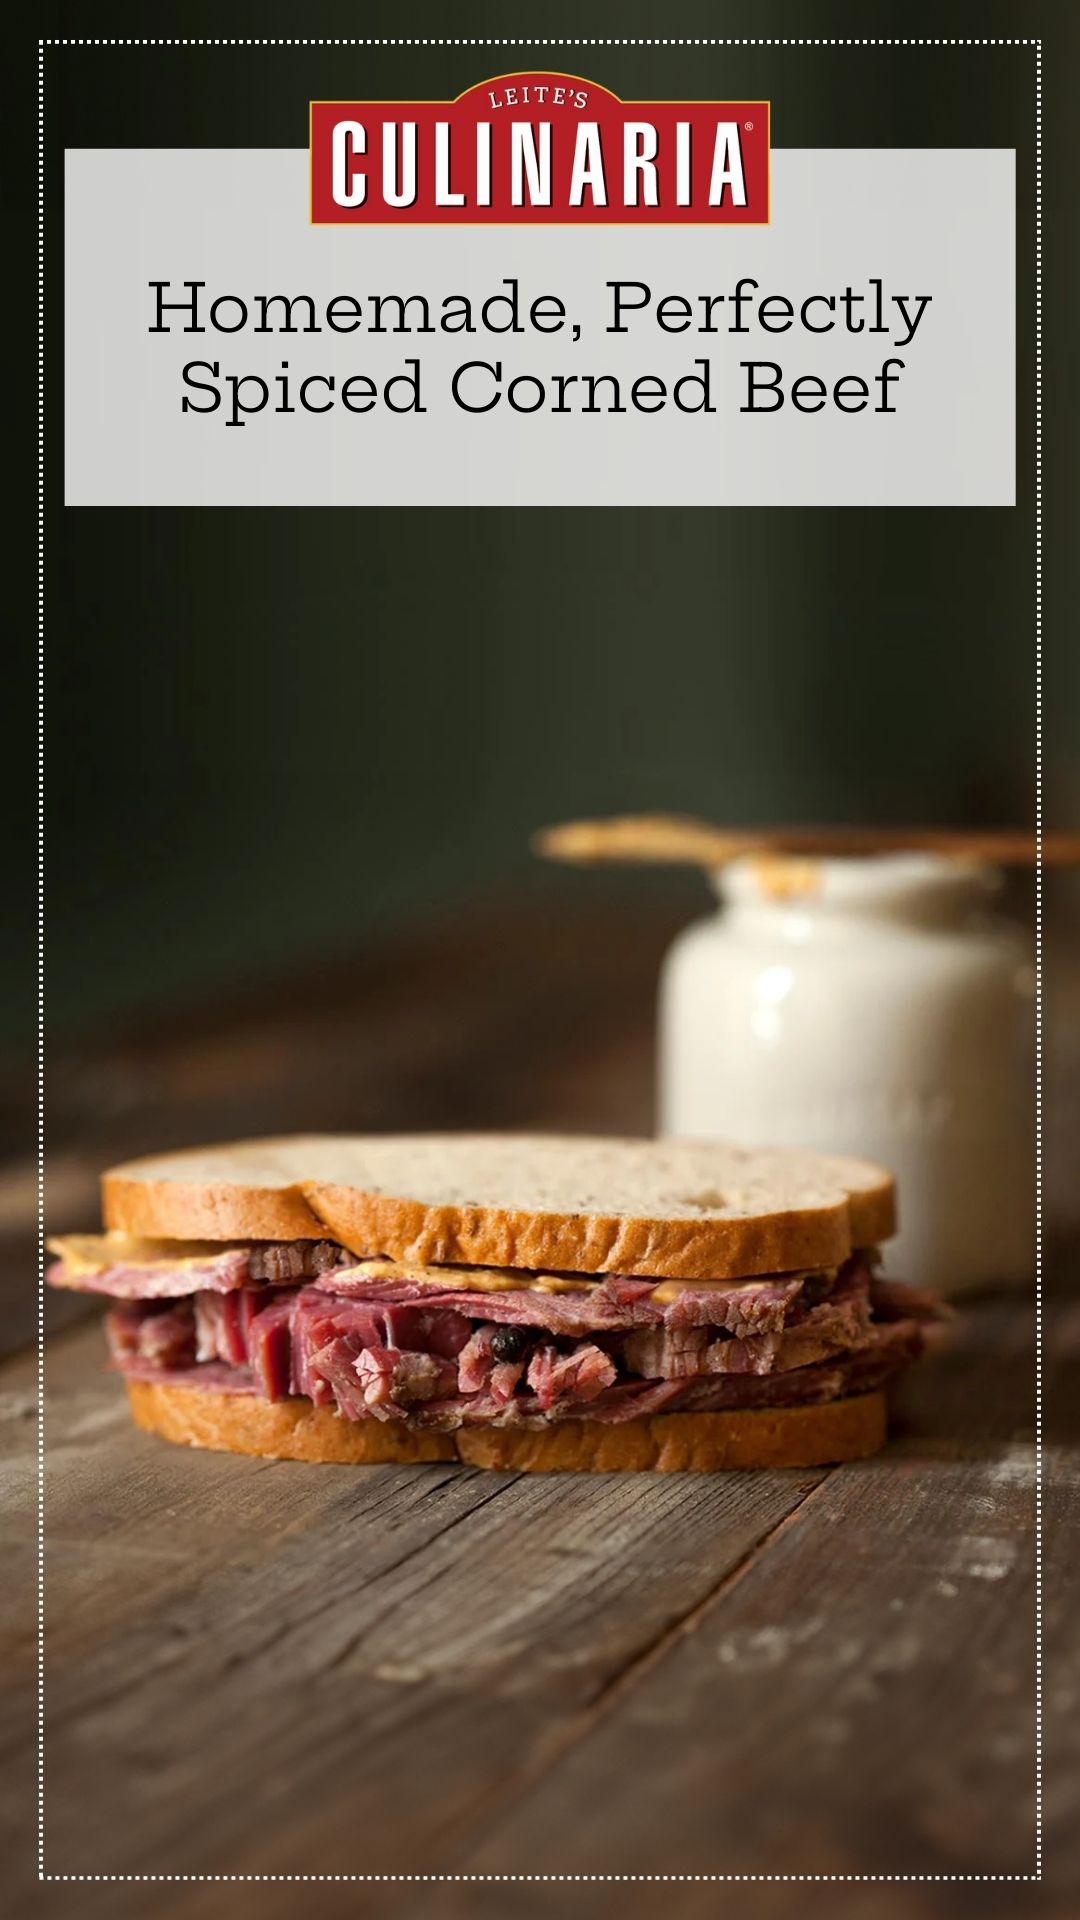 Several slices of homemade corned beef in a sandwich on a wooden table.